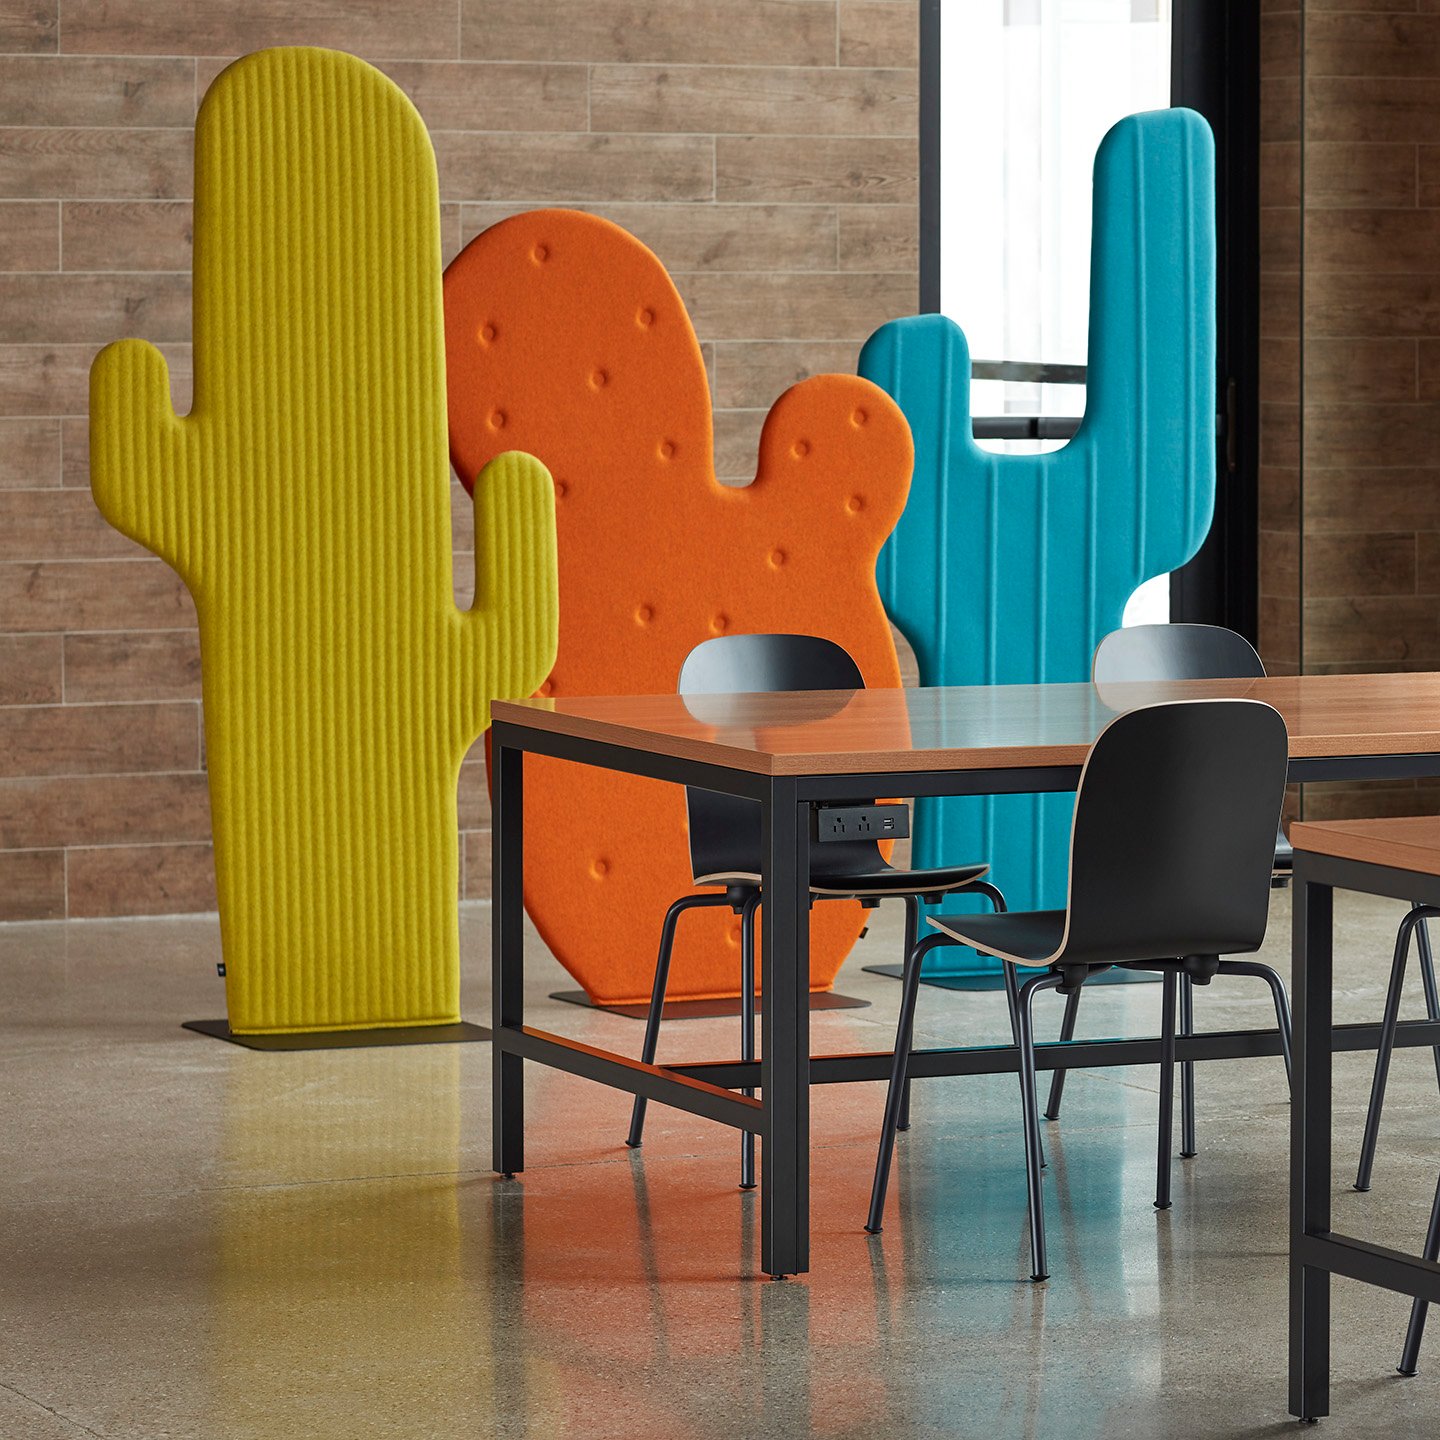 Haworth Buzzicactus screen in yellow, orange, and blue color in office space